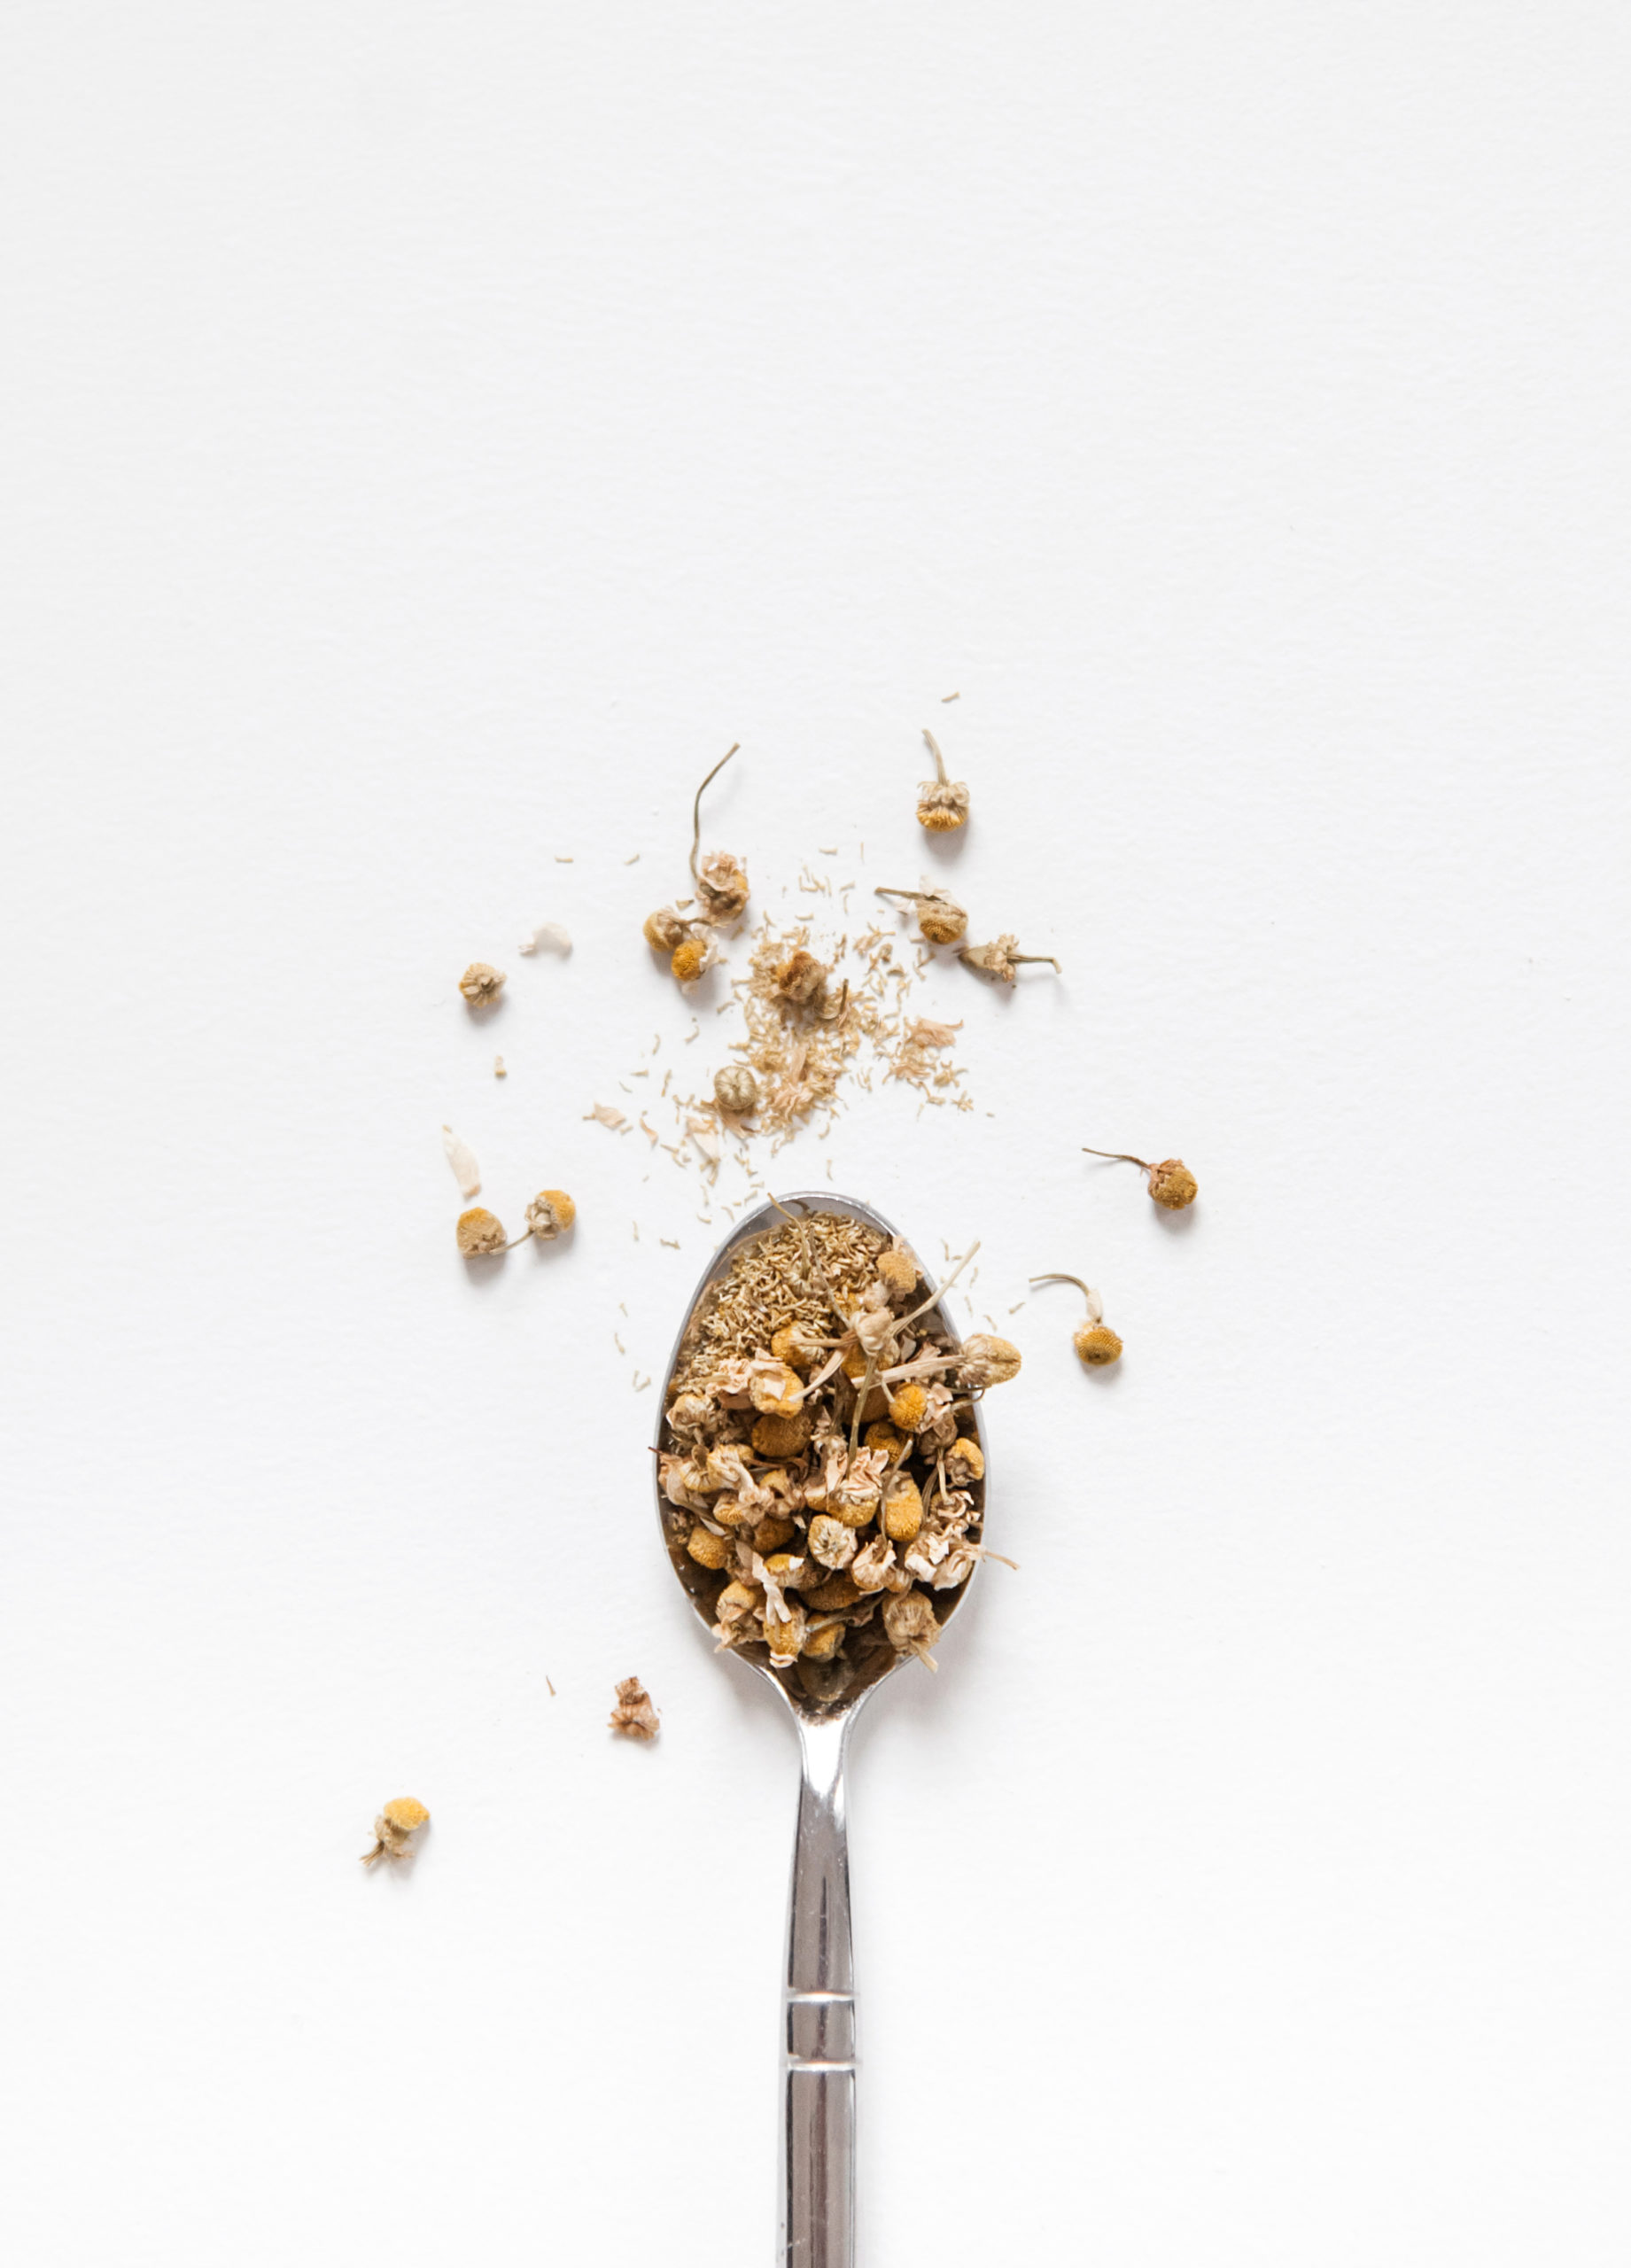 This image shows a spoon full of herbal tea.